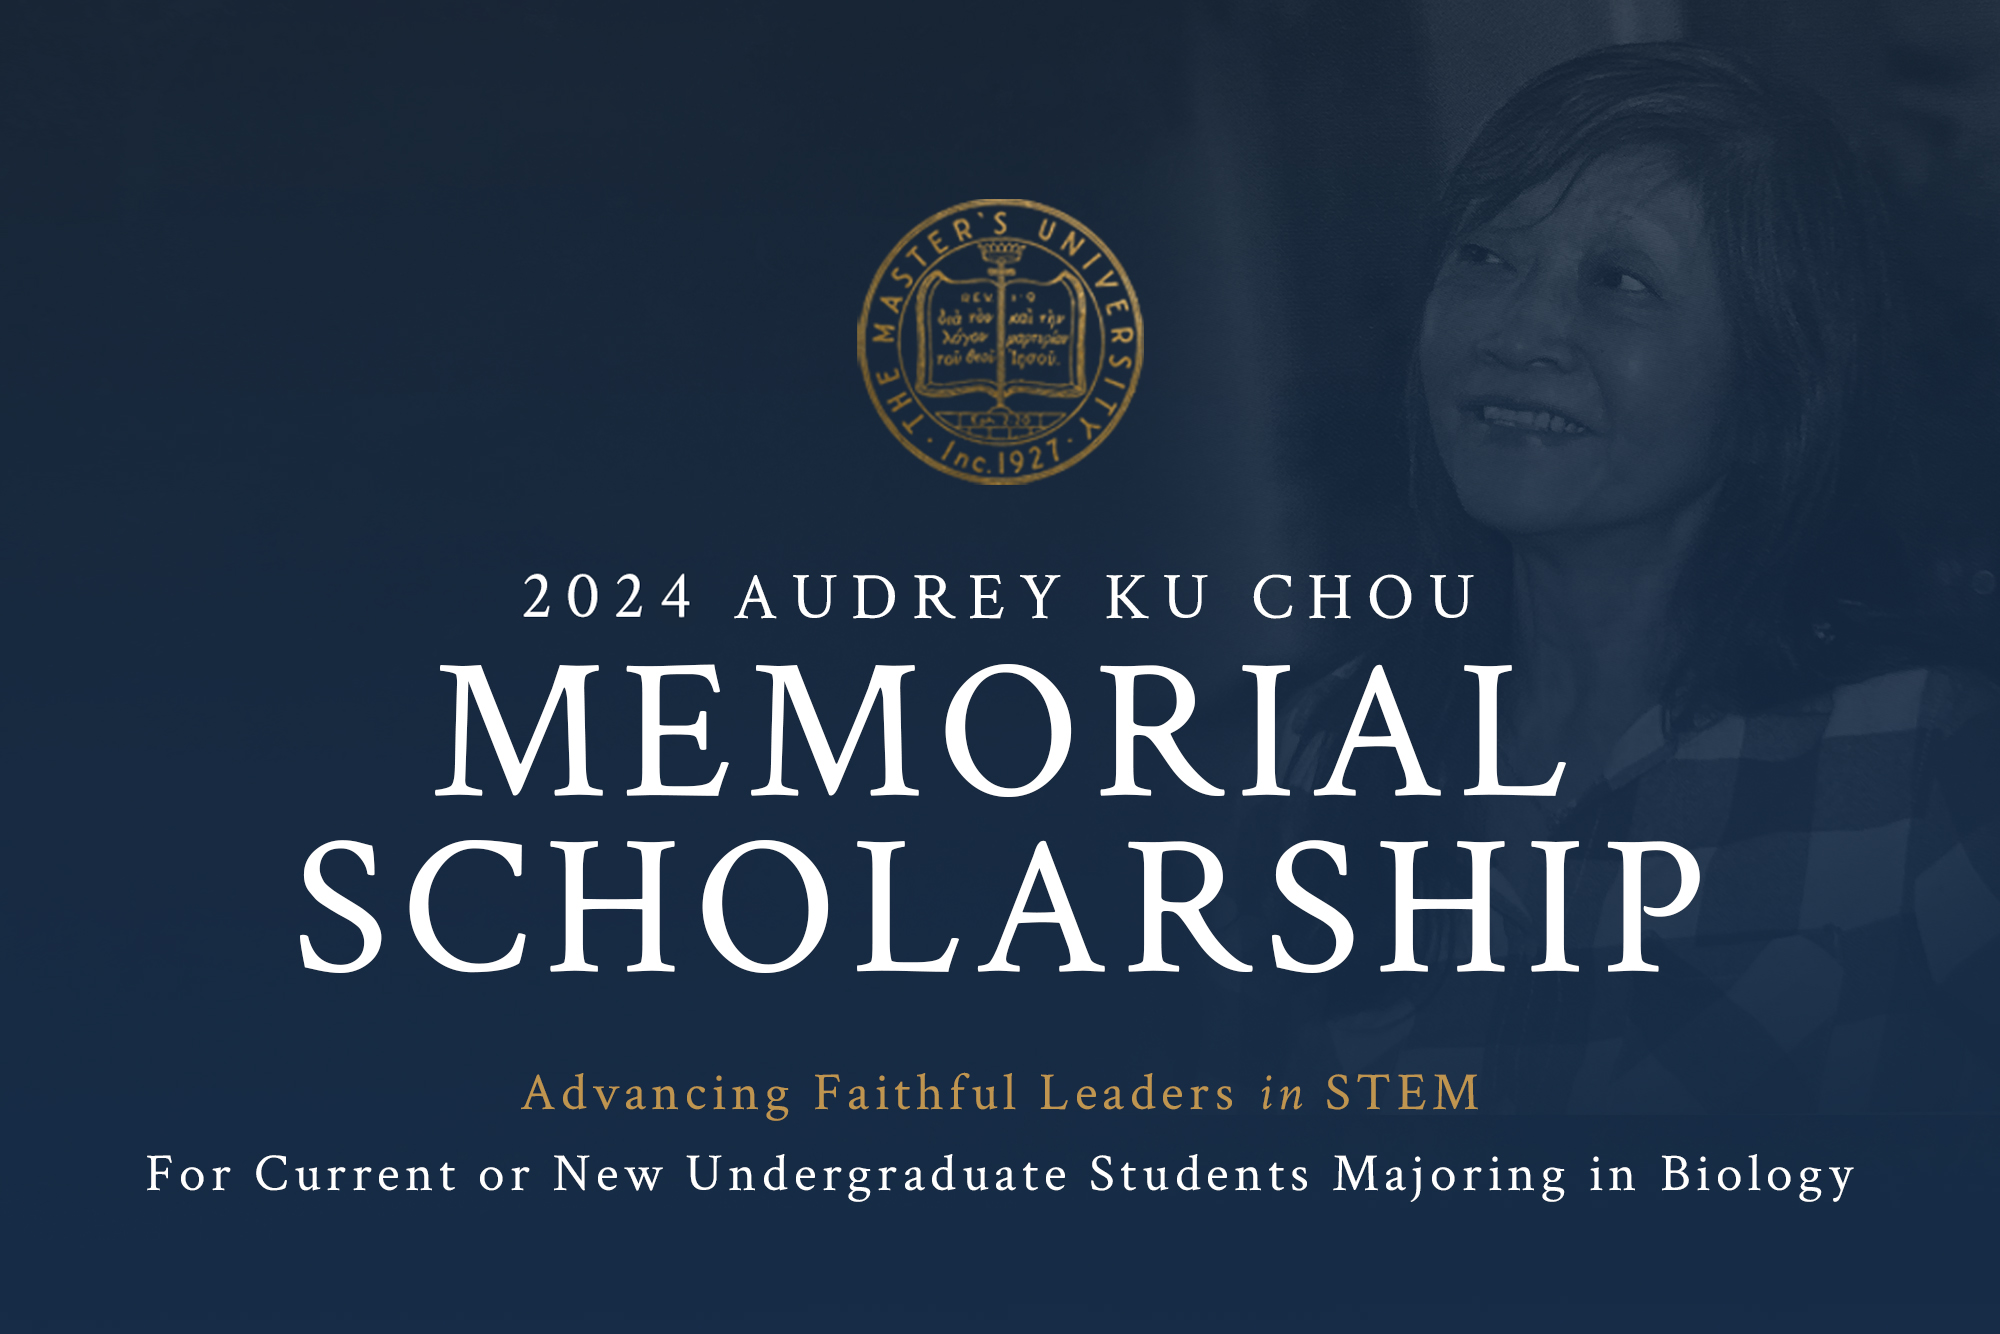 Apply for New STEM Scholarship at TMU by Dec. 1 Featured Image